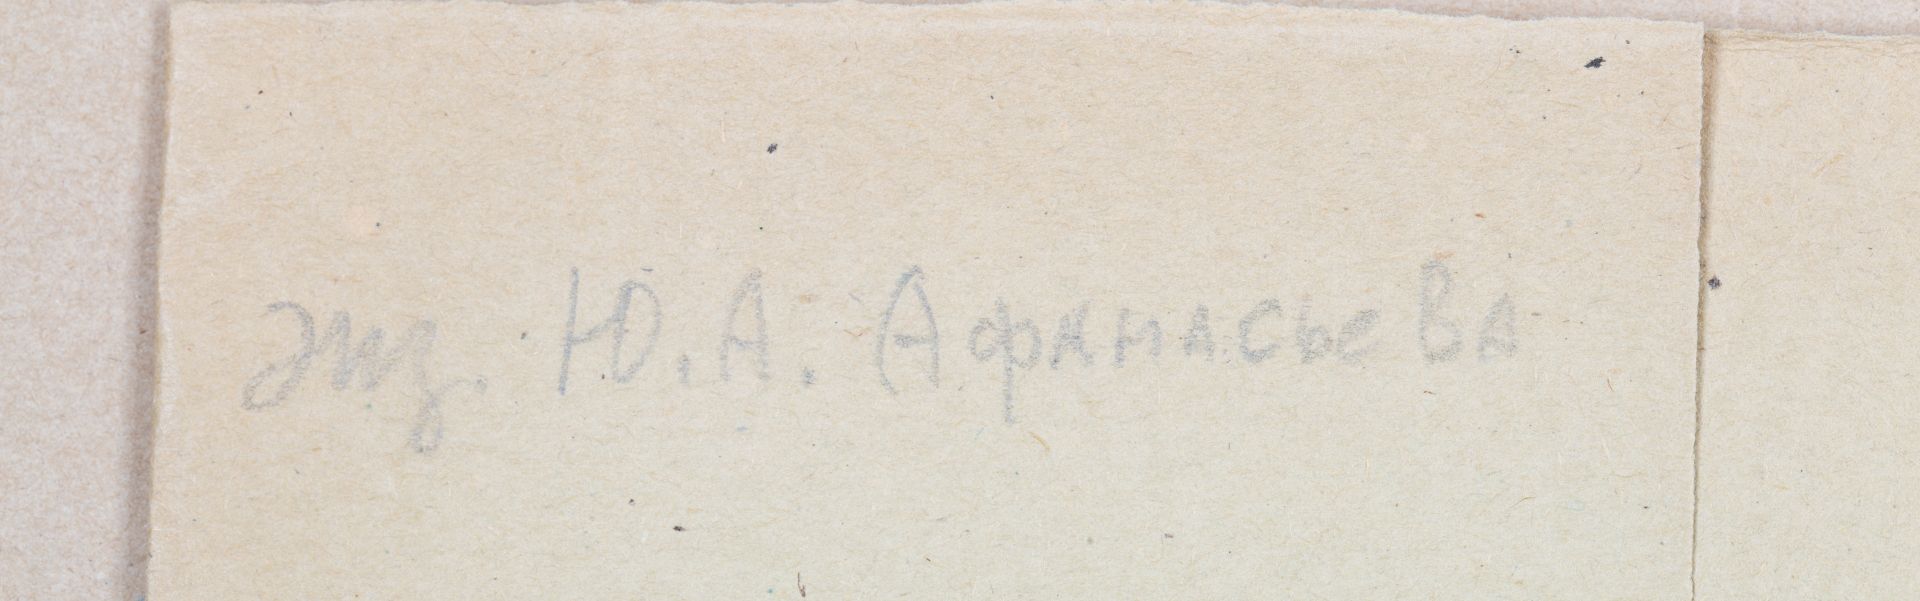 PASTERNAK, AUTOGRAPH COPY OF A MANUSCRIPT, "POEMS FROM A NOVEL IN PROSE," 1948 - Image 4 of 4